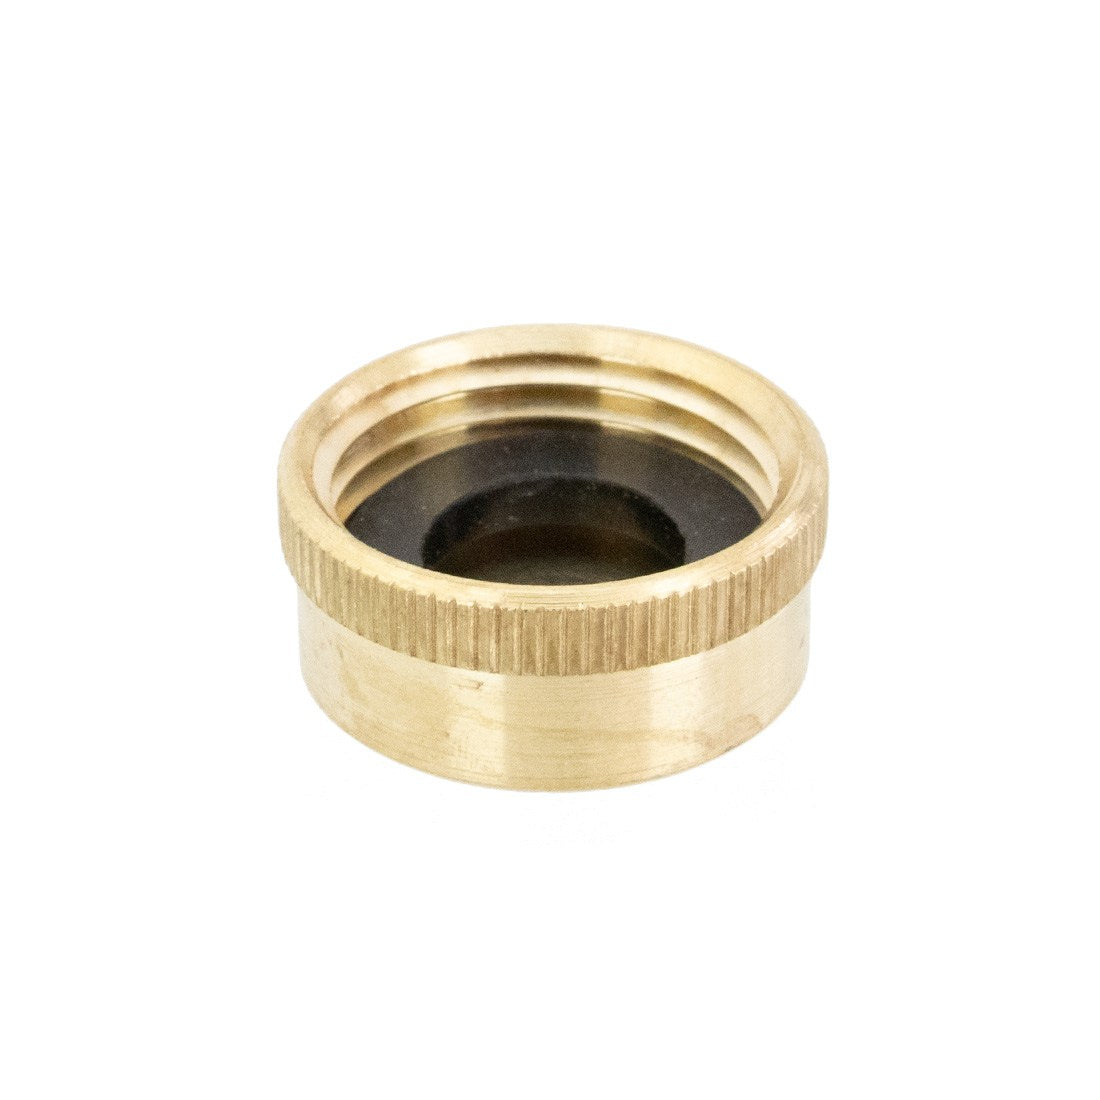 Garden Hose Cap with Washer - Brass - Angled Front View